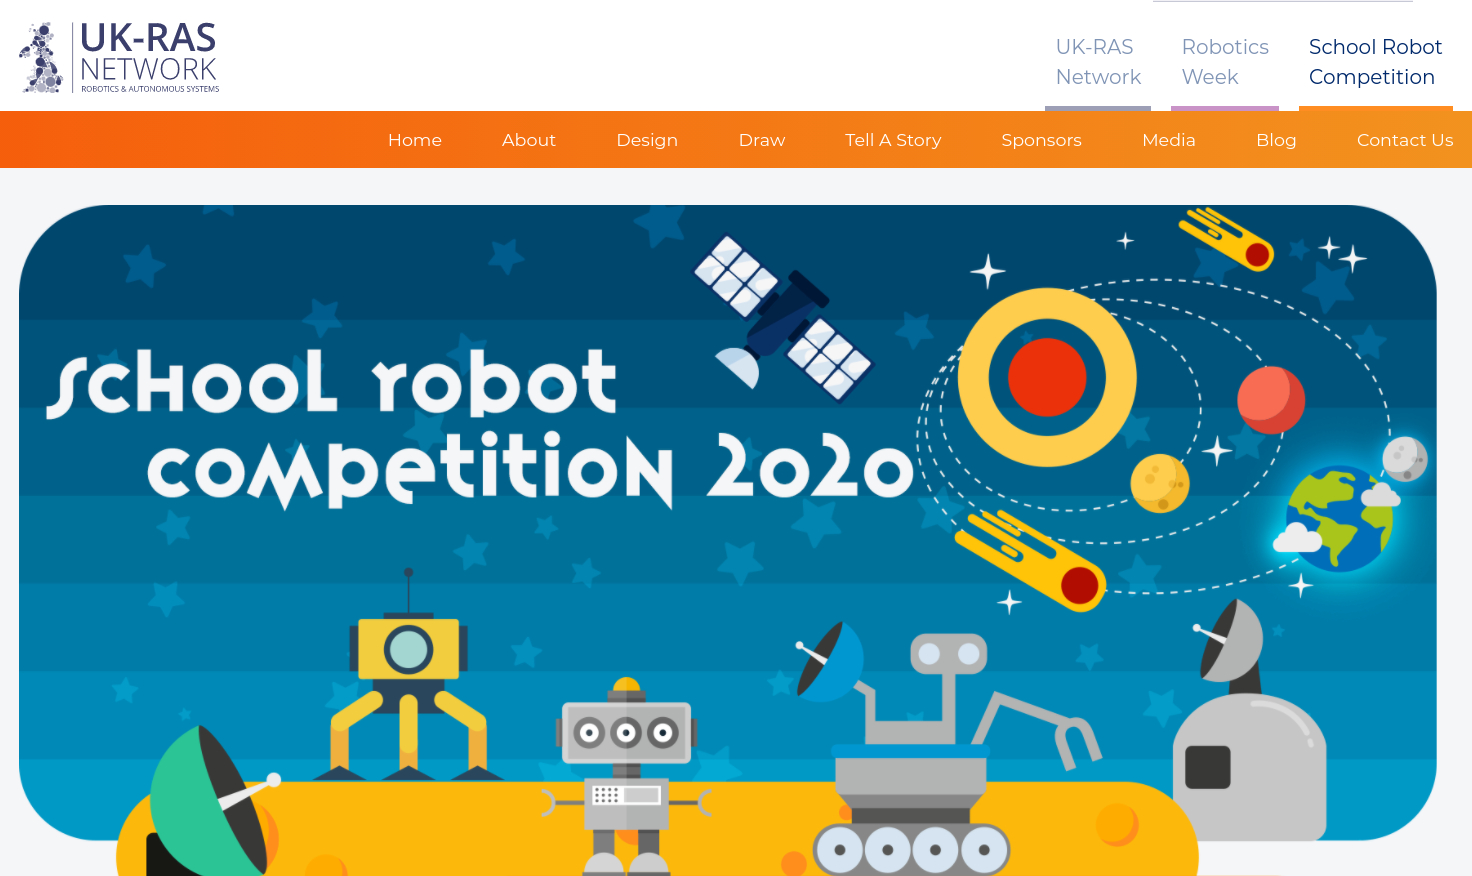 https://static.electronicsweekly.com/wp-content/uploads/2020/09/25122917/school-robot-competition.jpg